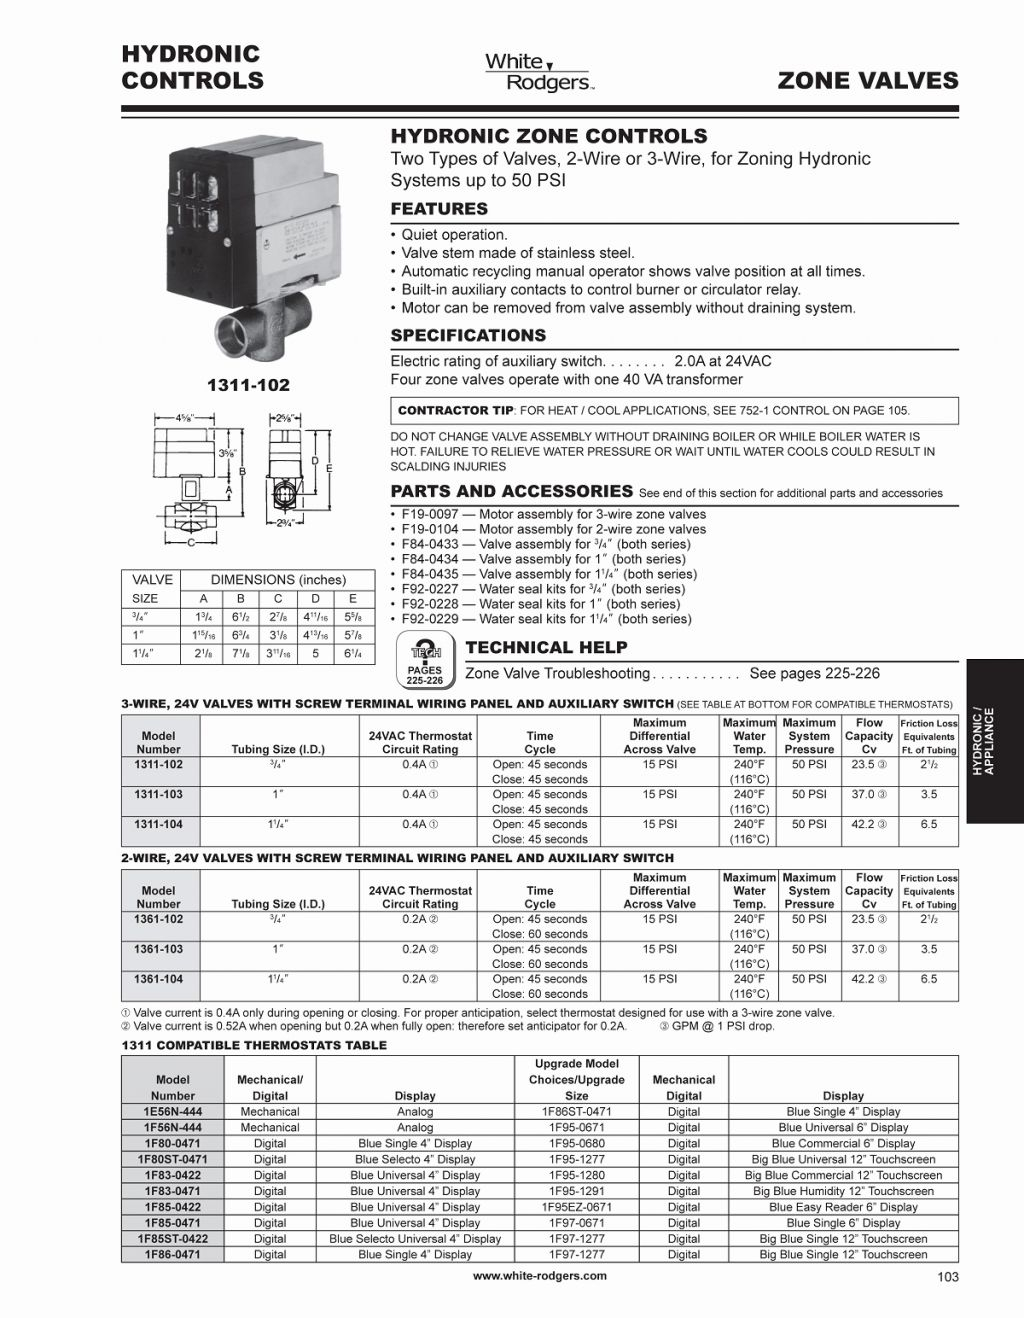 white rodgers 1311 102 wiring diagram Download-Size of Wiring Diagram Taco Zone Valve Wiring Diagram New Contemporary Warm Zone Wiring 7-p